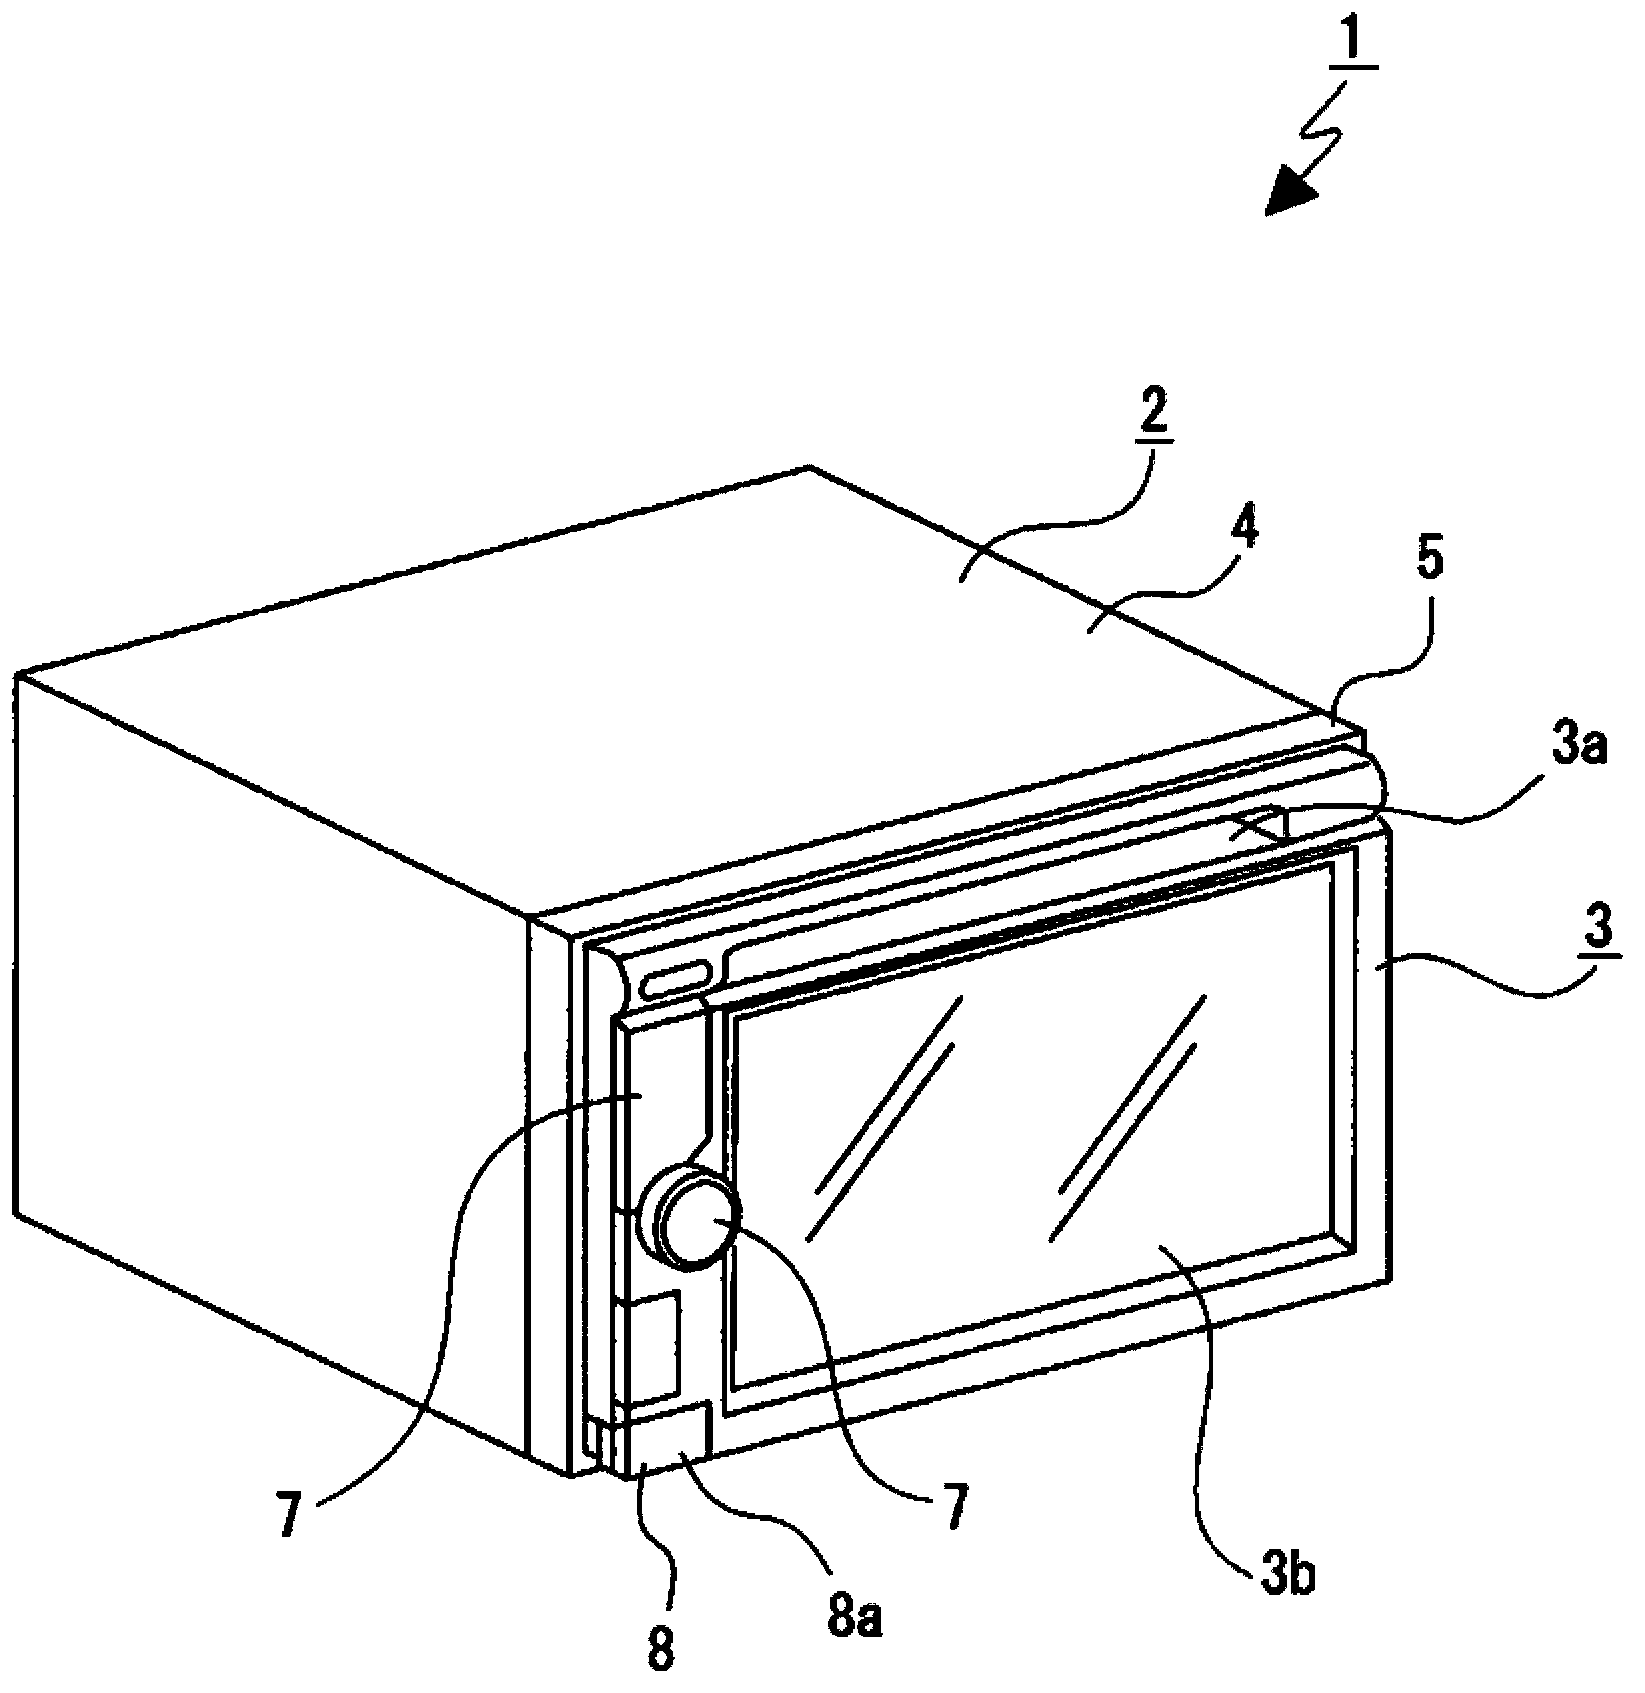 In-vehicle electronic apparatus